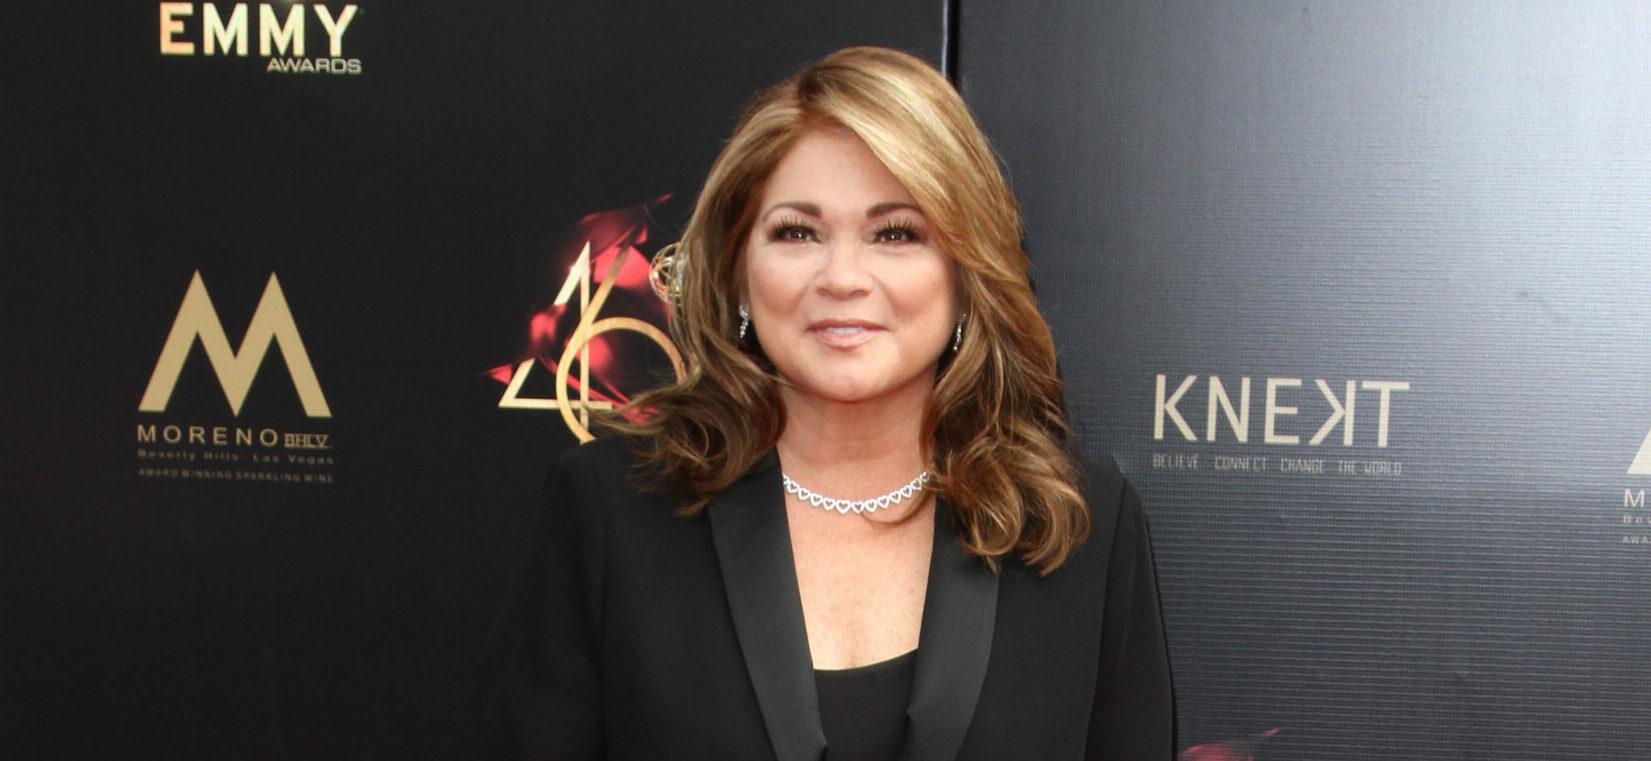 Valerie Bertinelli Gushes About Effect Of Dry January: ‘Down A Size’